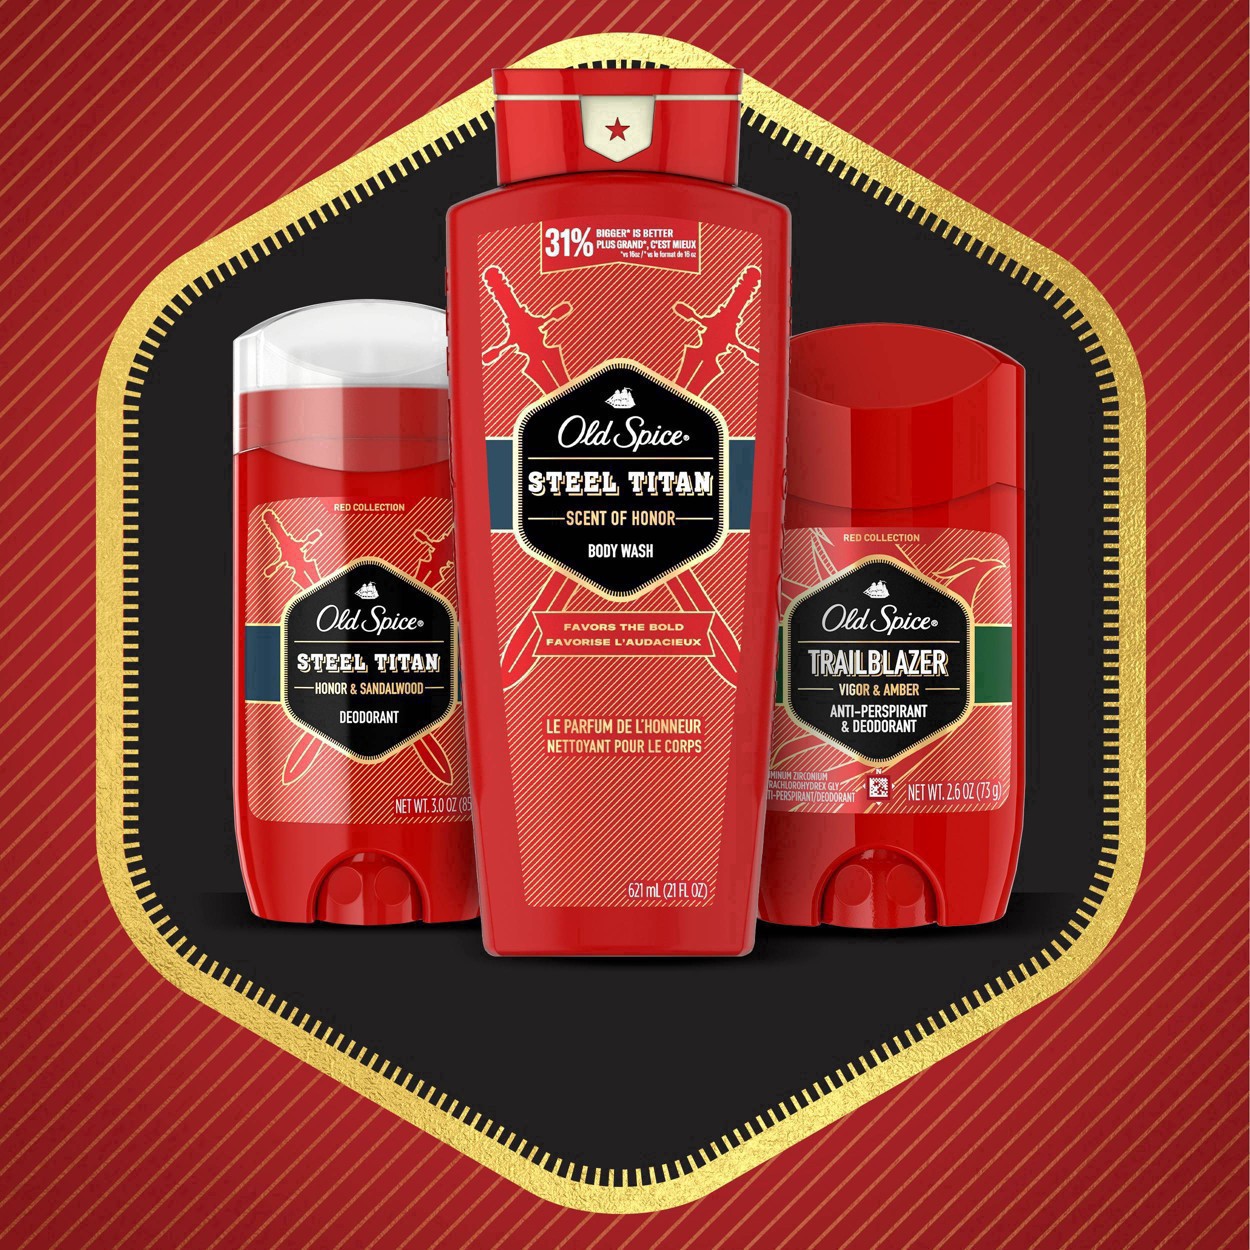 slide 40 of 95, Old Spice Red Collection Swagger Scent Deodorant for Men, Value Pack, 3.0 oz, Pack of 2, 2 ct; 3 oz